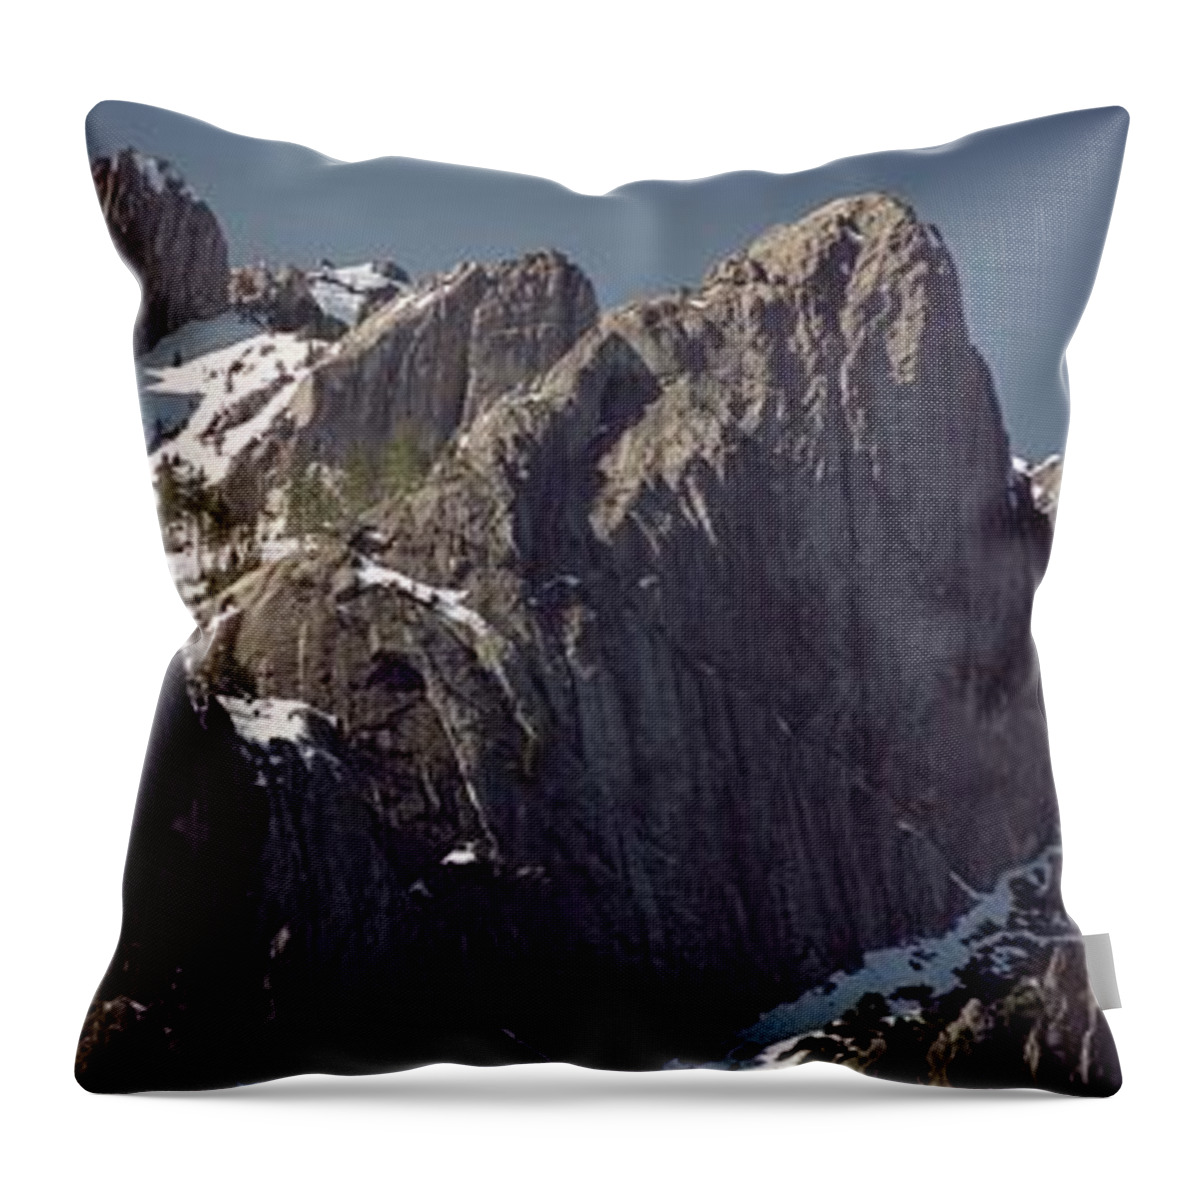 Castle Crags Throw Pillow featuring the photograph Castle Crags Panorama by James B Toy